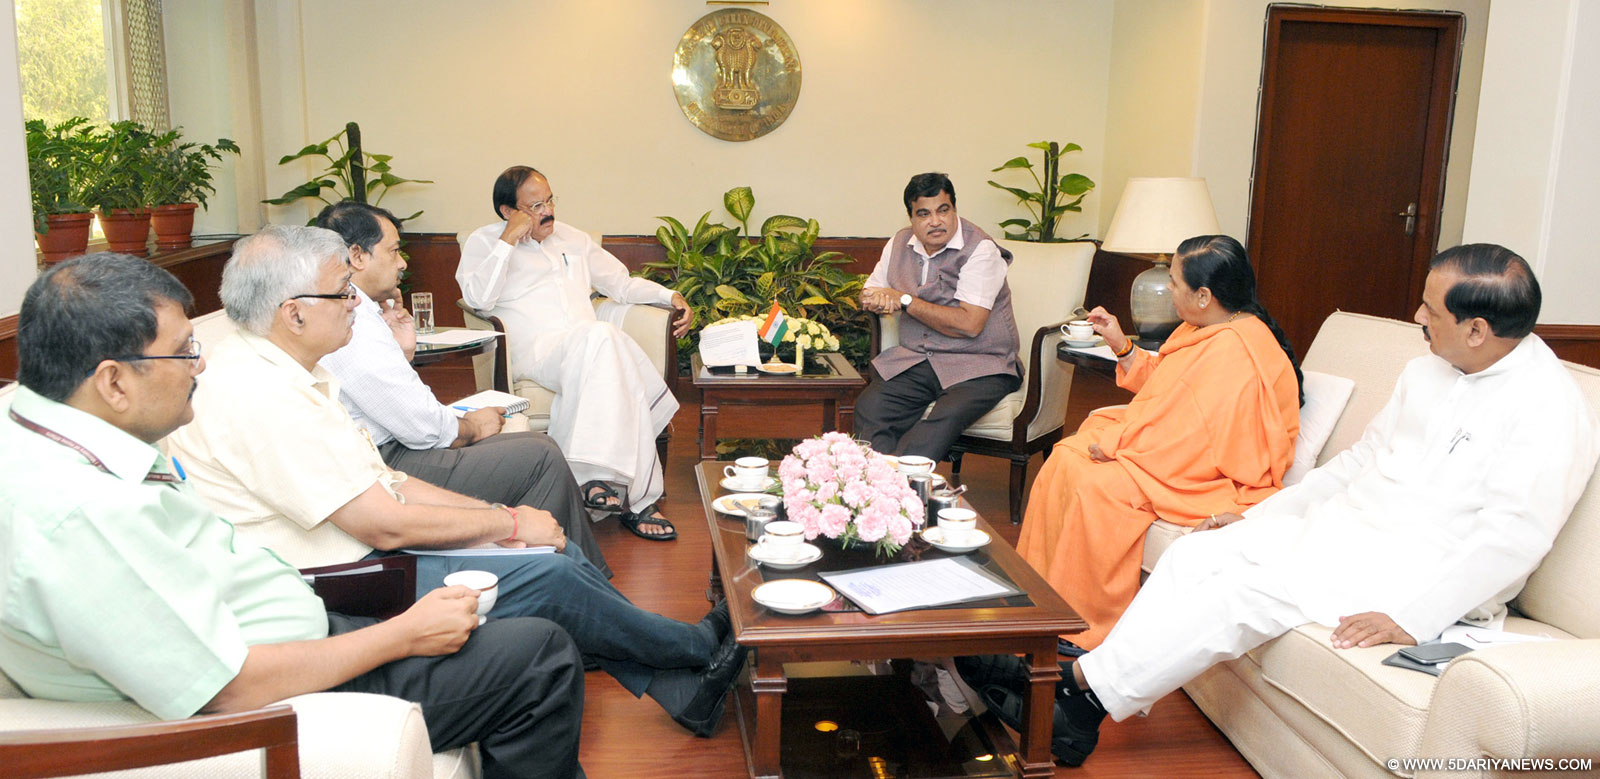 The Union Minister for Urban Development, Housing and Urban Poverty Alleviation and Parliamentary Affairs, Shri M. Venkaiah Naidu, the Union Minister for Road Transport & Highways and Shipping, Shri Nitin Gadkari, the Union Minister for Water Resources, River Development and Ganga Rejuvenation, Sushri Uma Bharti and the Minister of State for Culture (Independent Charge), Tourism (Independent Charge) and Civil Aviation, Dr. Mahesh Sharma in a review meeting on Ganga Rejuvenation, in New Delhi on 